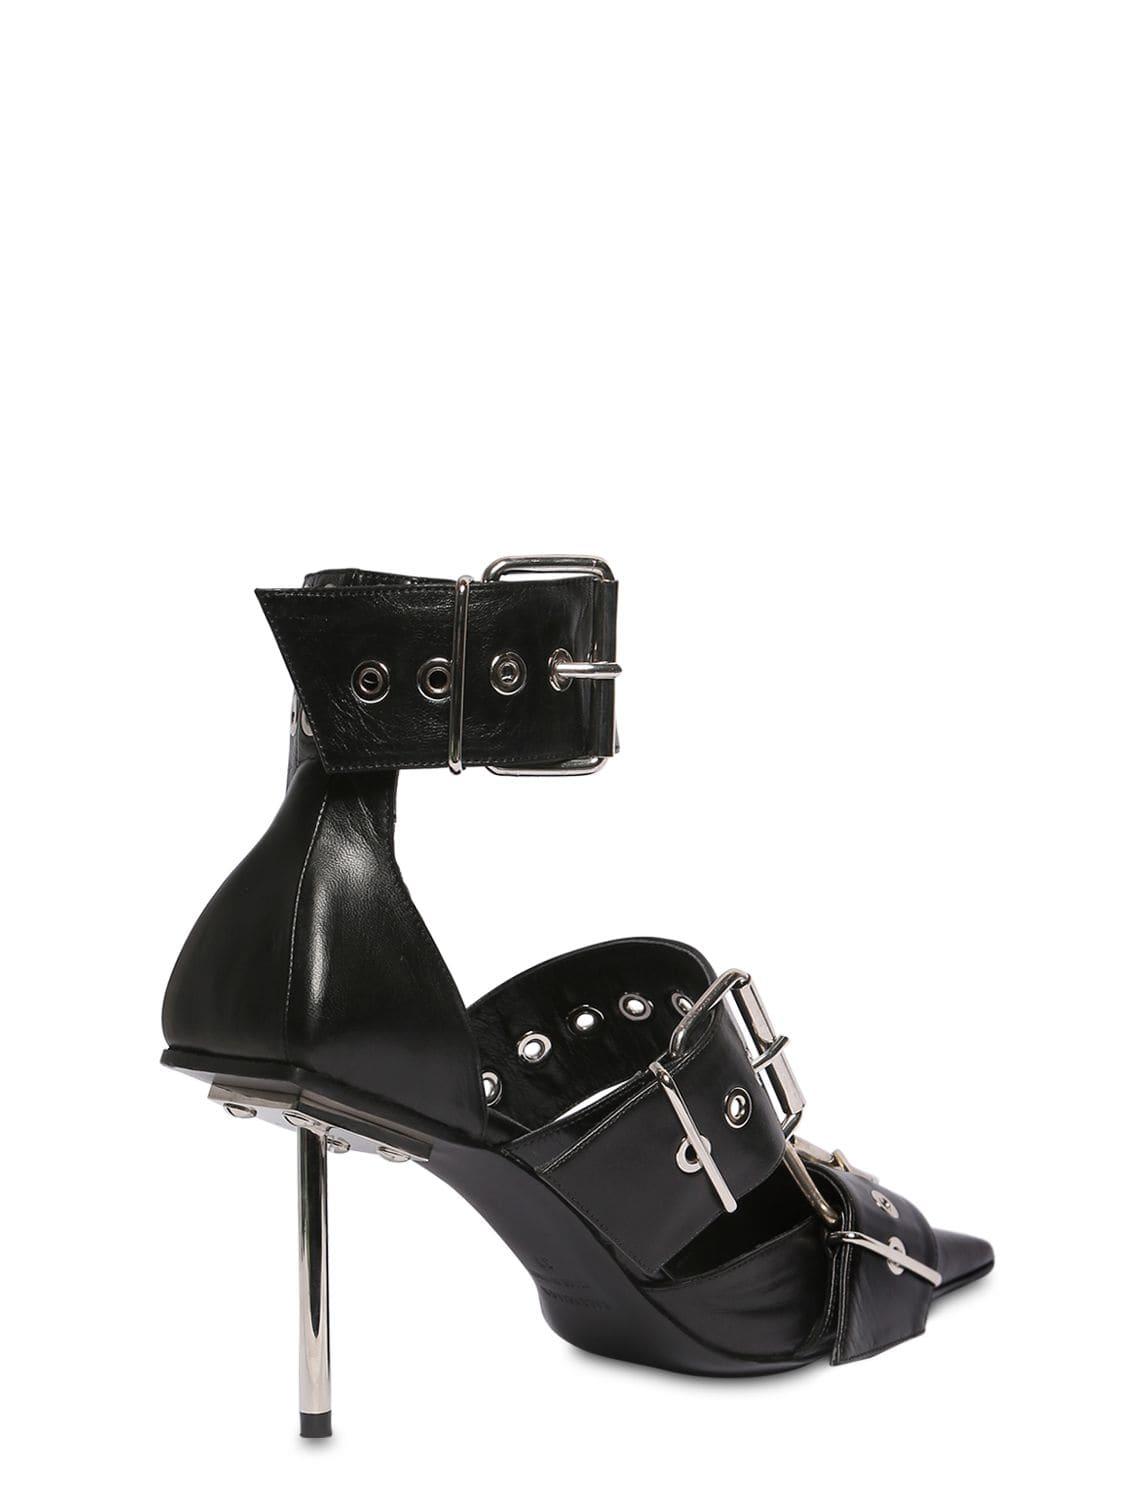 Balenciaga Leather Point-toe Pumps in Black Lyst